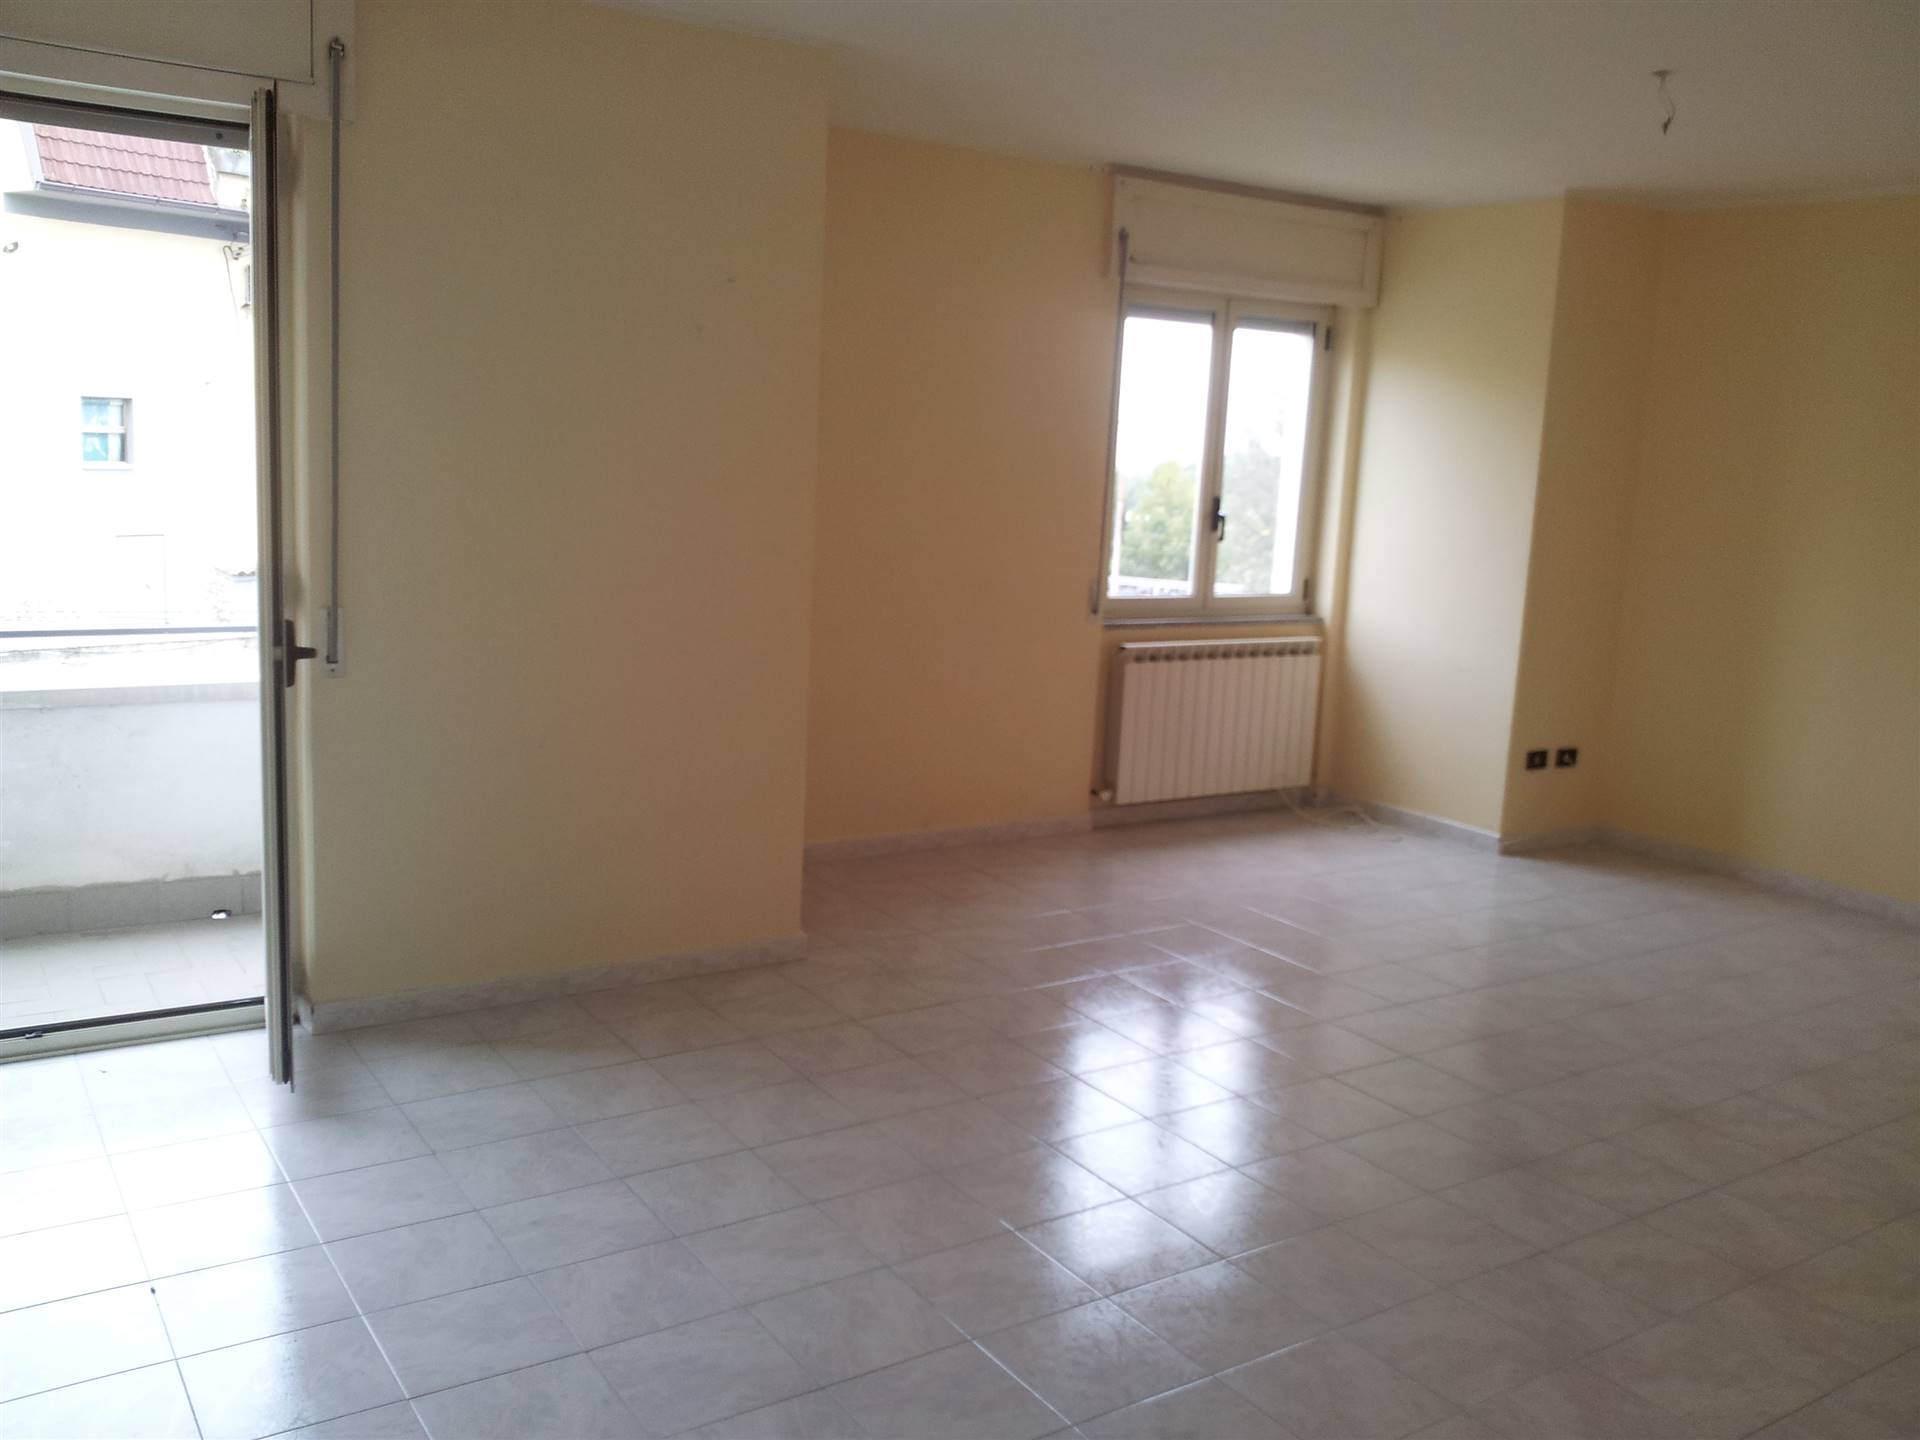 STAZIONE DI MONTALTO, MONTALTO UFFUGO, Apartment for rent of 95 Sq. mt., Good condition, Heating Individual heating system, Energetic class: G, 